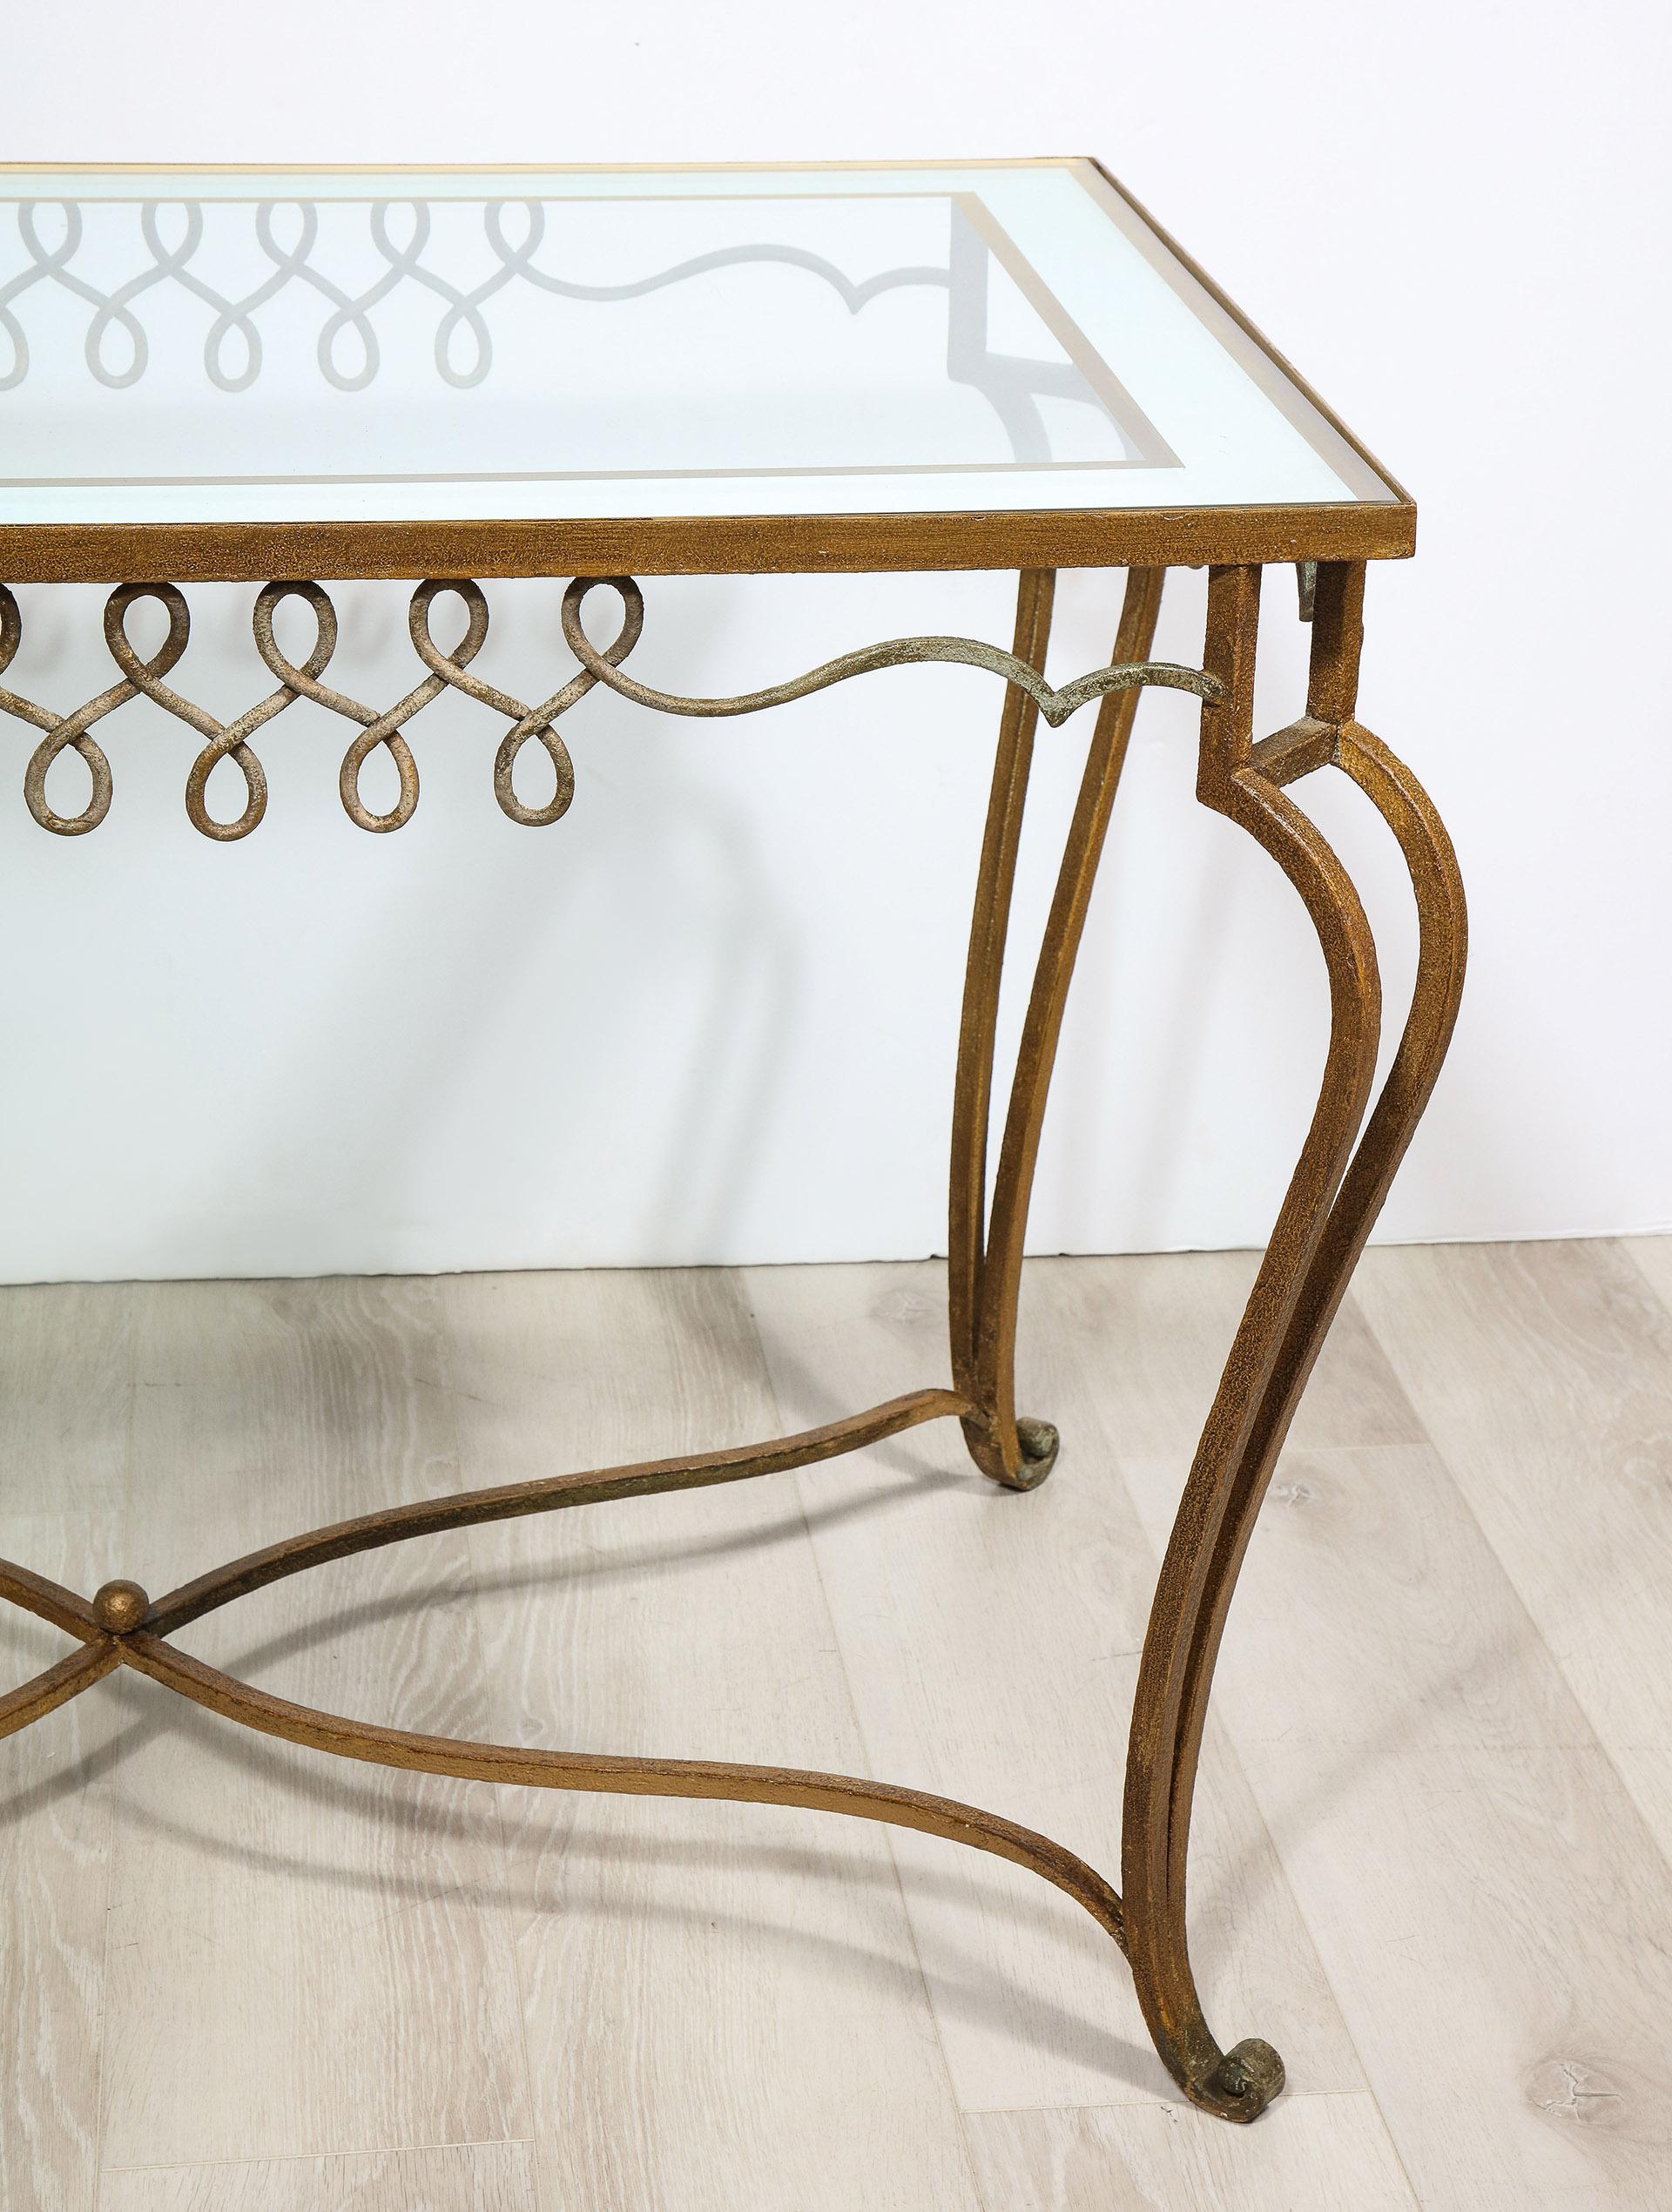 20th Century Iron and Élomisé Table Attributed to René Prou For Sale